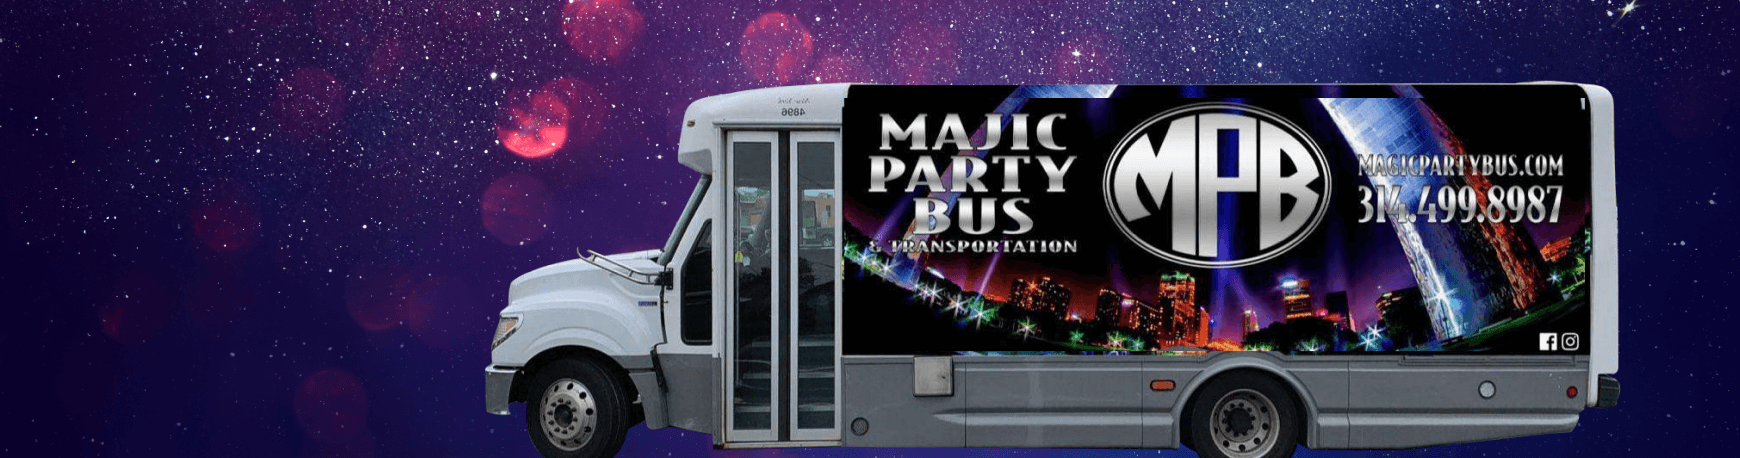 https://majicpartybus.com/wp-content/uploads/2021/10/innerpage-banner-new.png